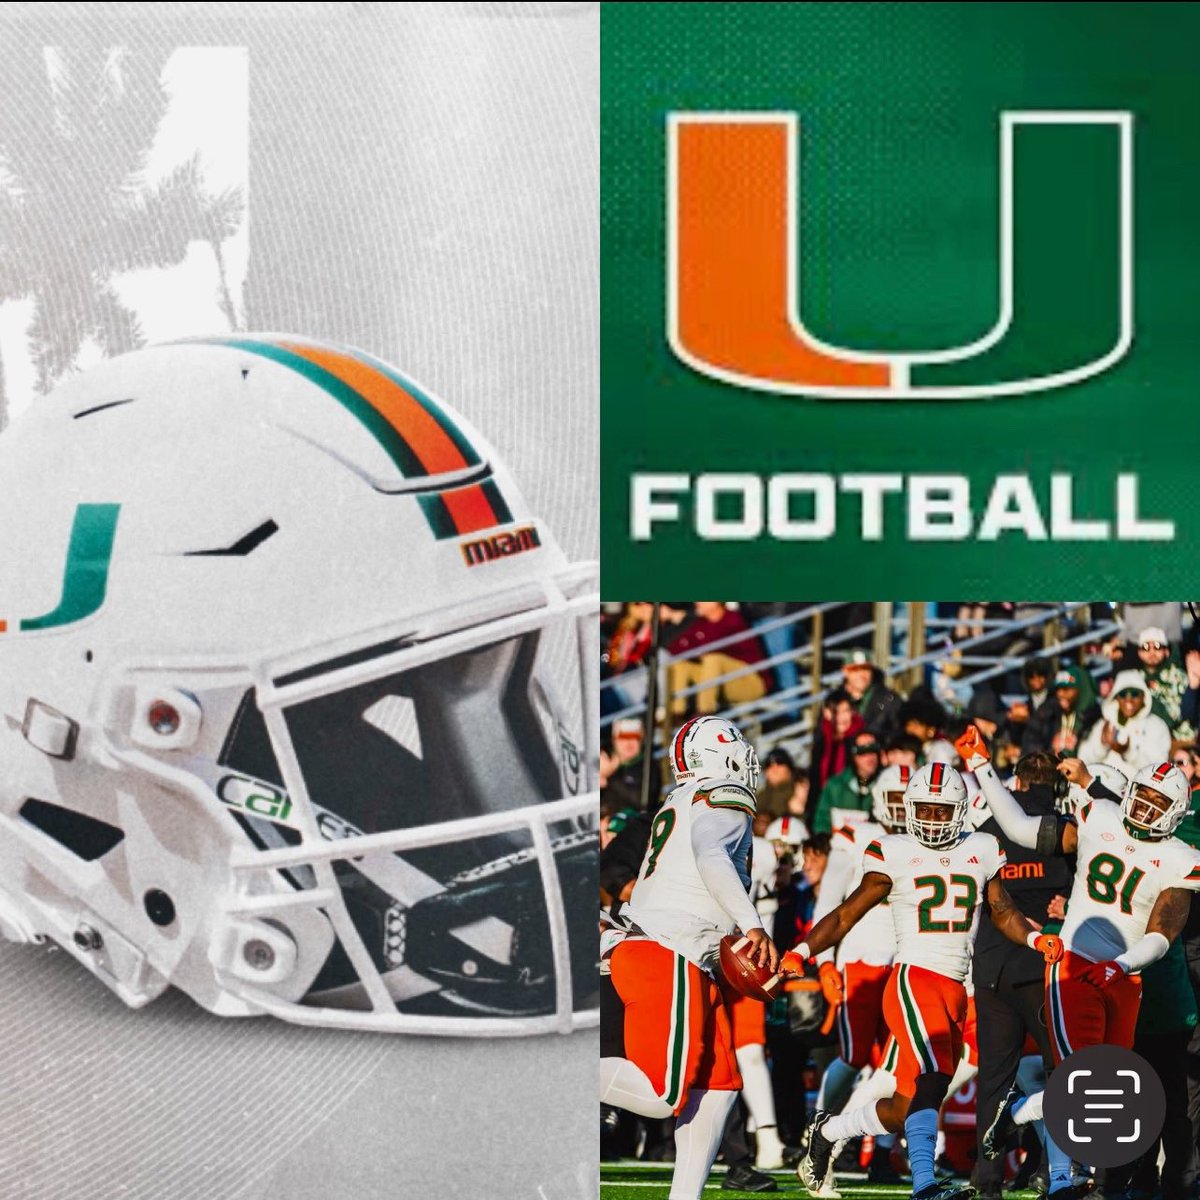 Blessed to receive an offer from @CanesFootball University of Miami @coach_cristobal @Coach_Merritt @coach_horsley @gabrieldbrooks @justinwells2424 #Agent0